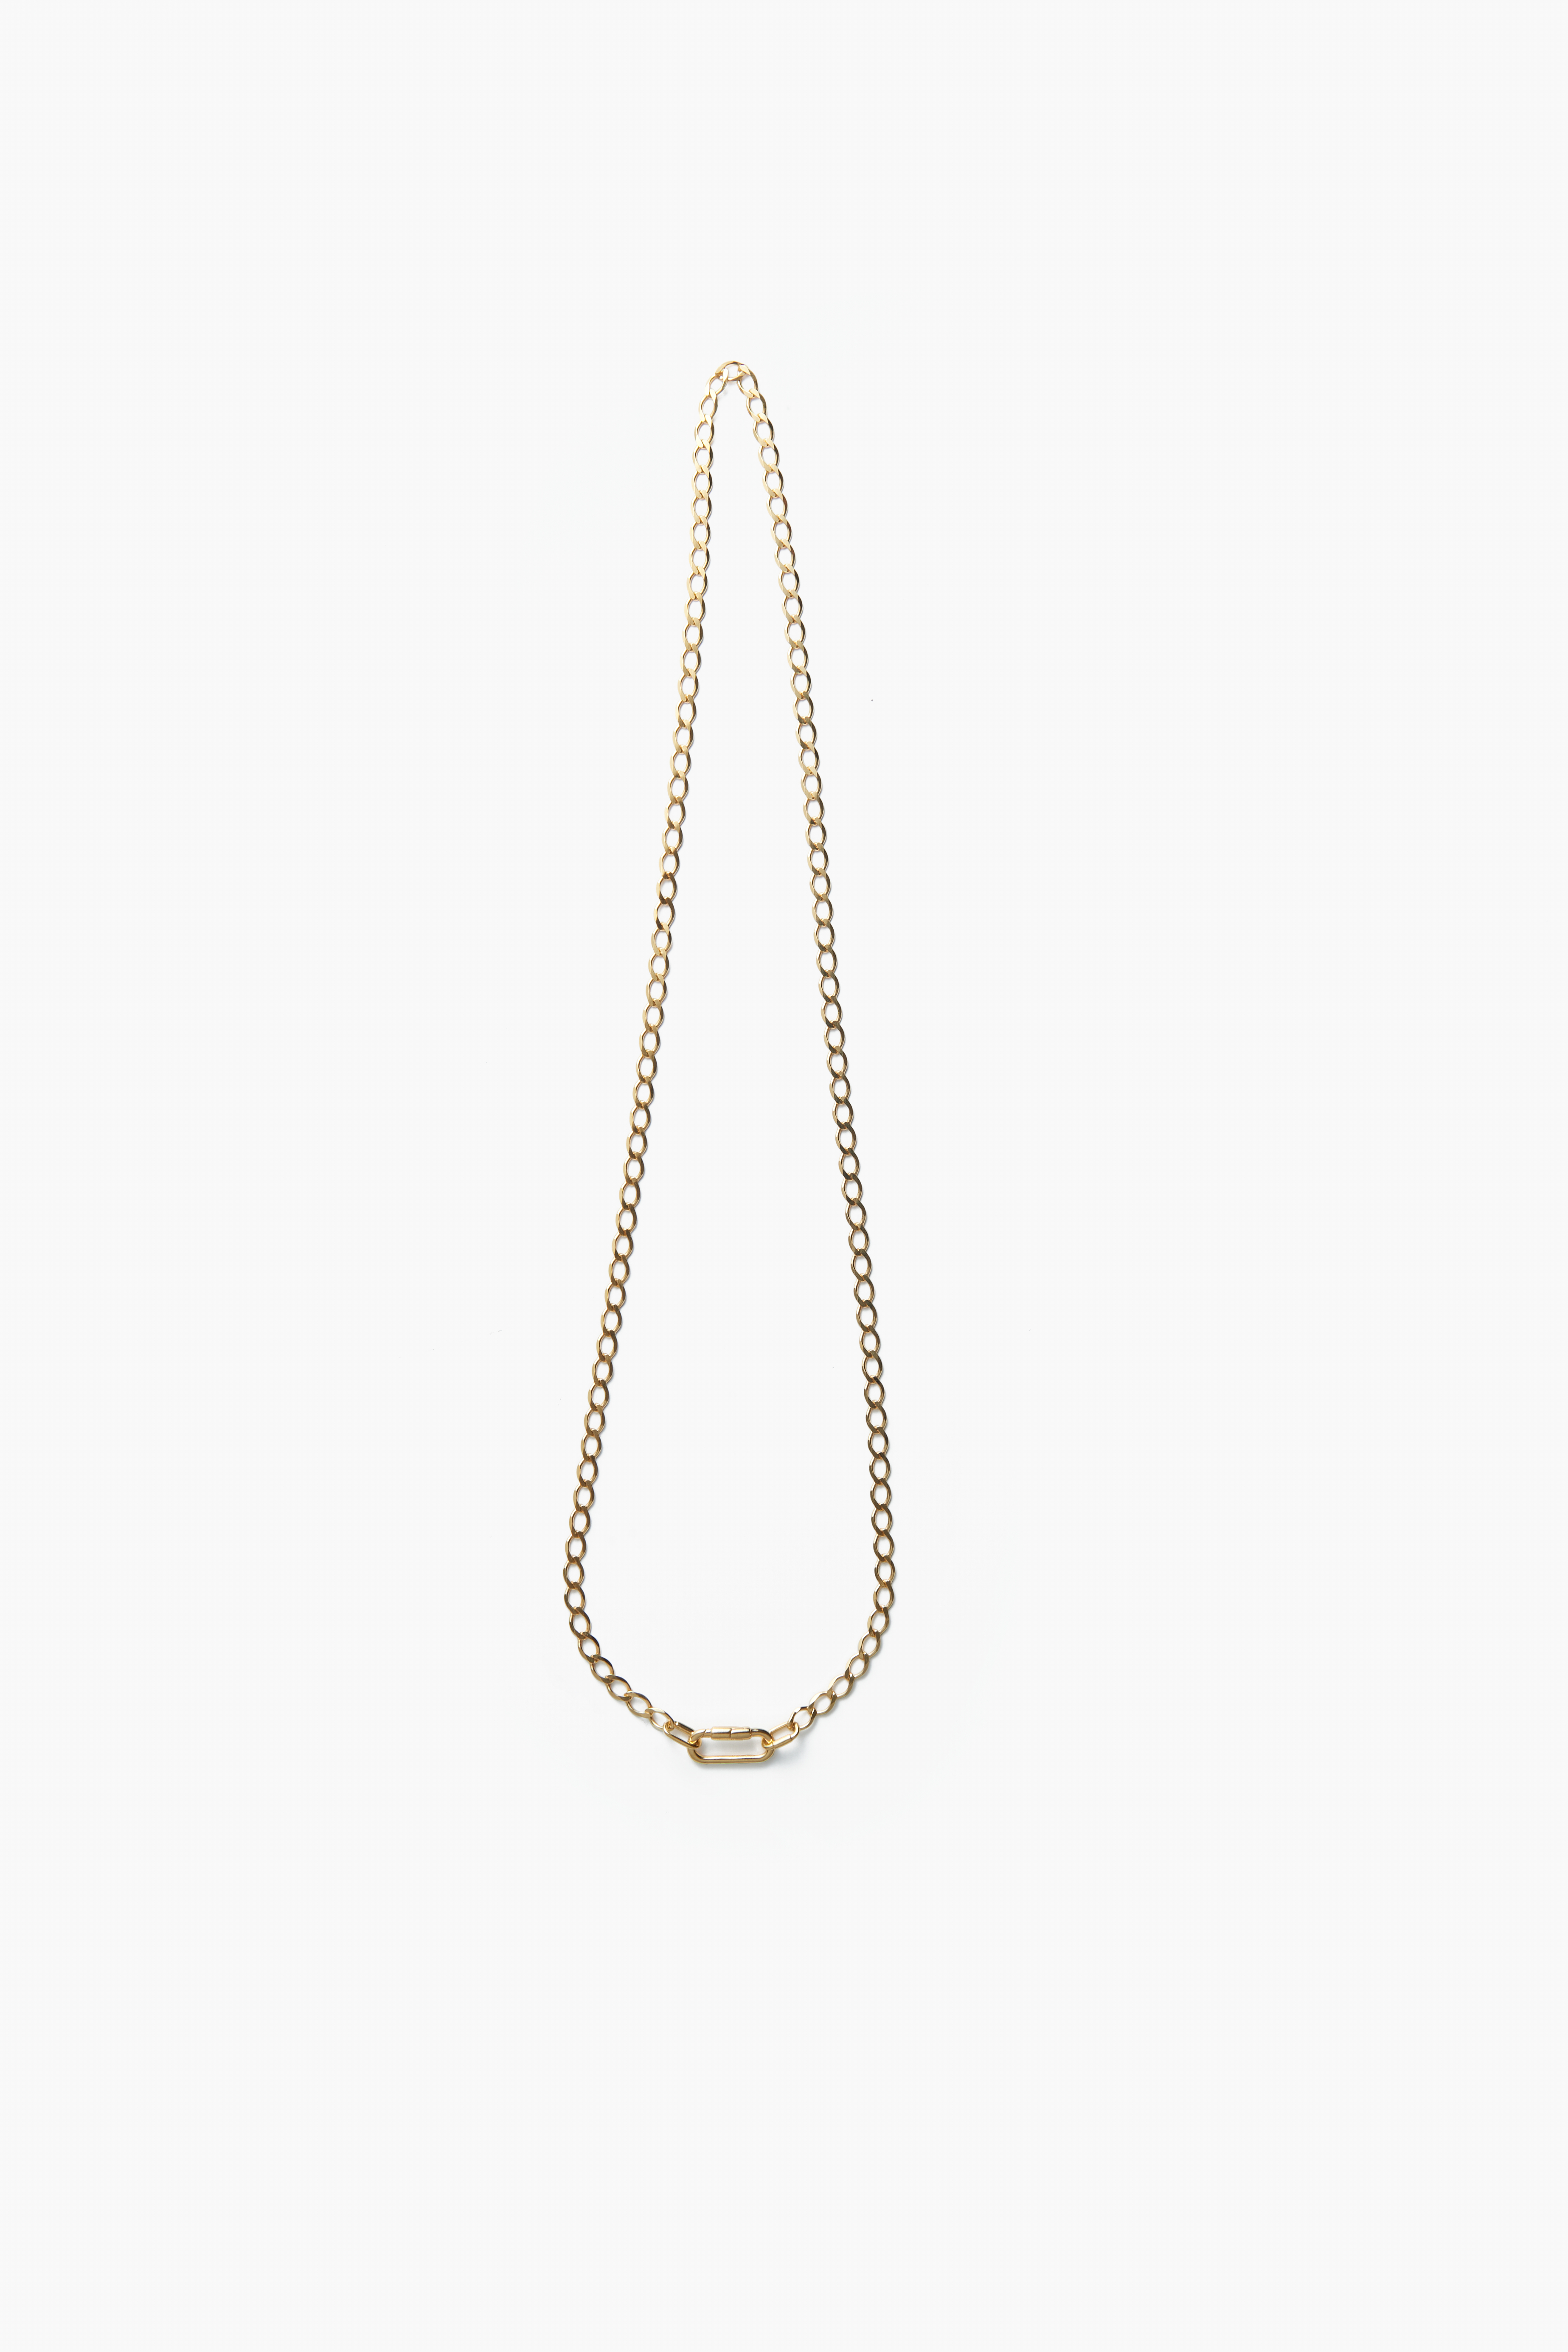 Nordhavn 55 Necklace - Yellow Gold